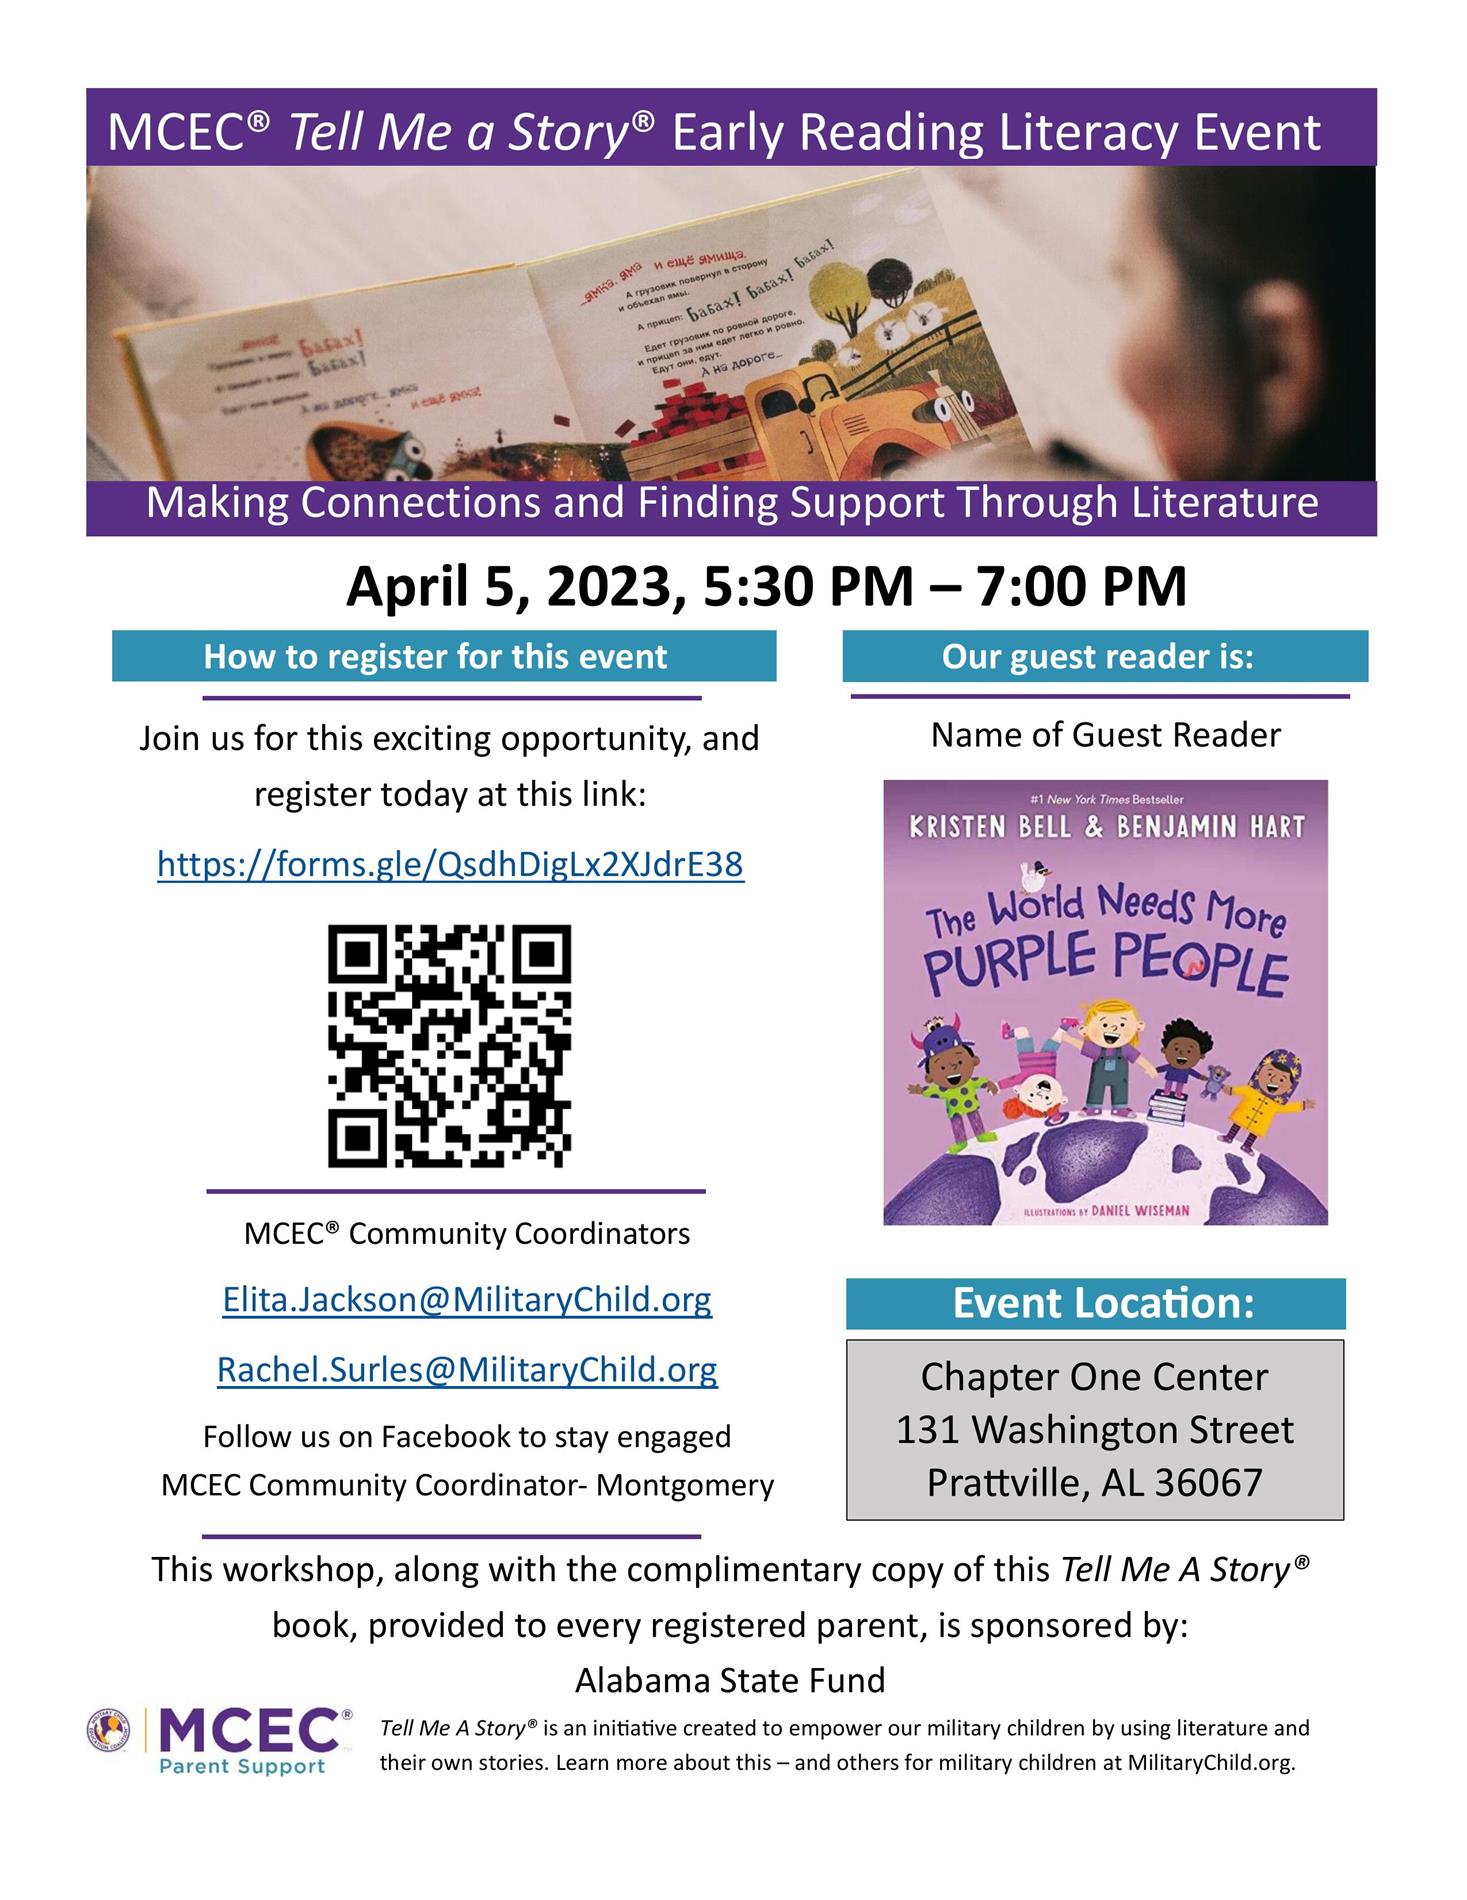 Early reading literacy event for military families. April 5, 2023. 5:30 pm until 7:00 pm. Location is the Chapter One Center, 131 Washington Street, Prattville, AL. You can register at this link. https://forms.gle/QsdhDigLx2XJdrE38 